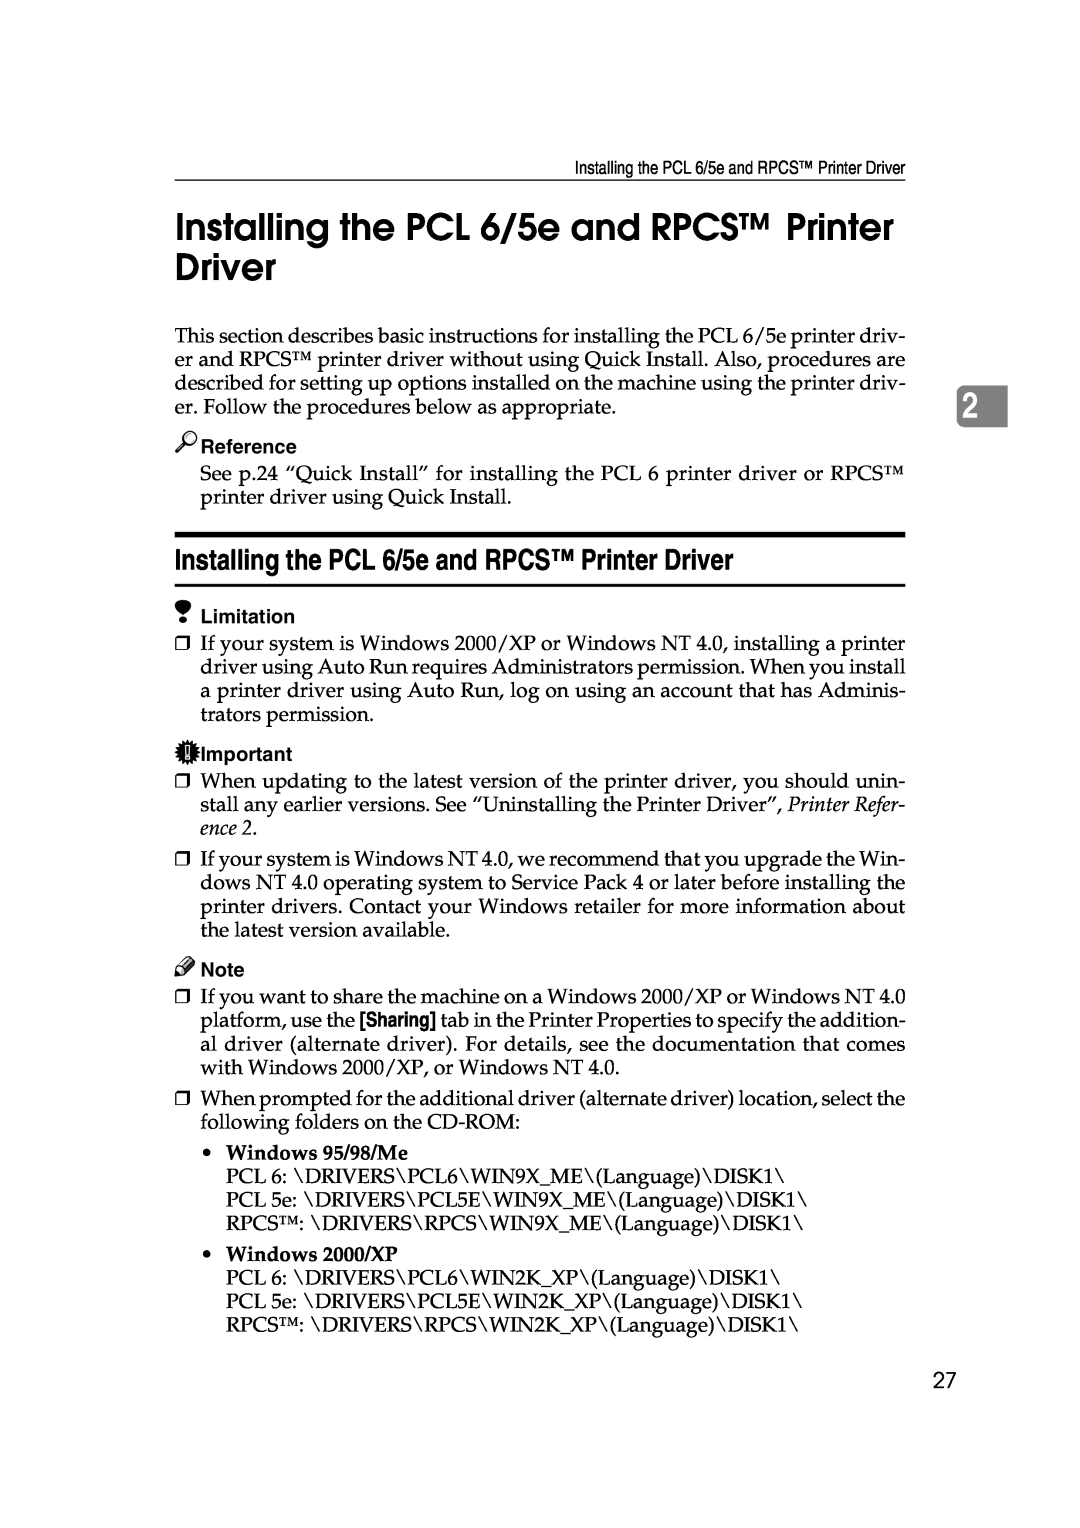 Xerox 1075 manual Installing the PCL 6/5e and RPCS Printer Driver, Reference, Limitation 